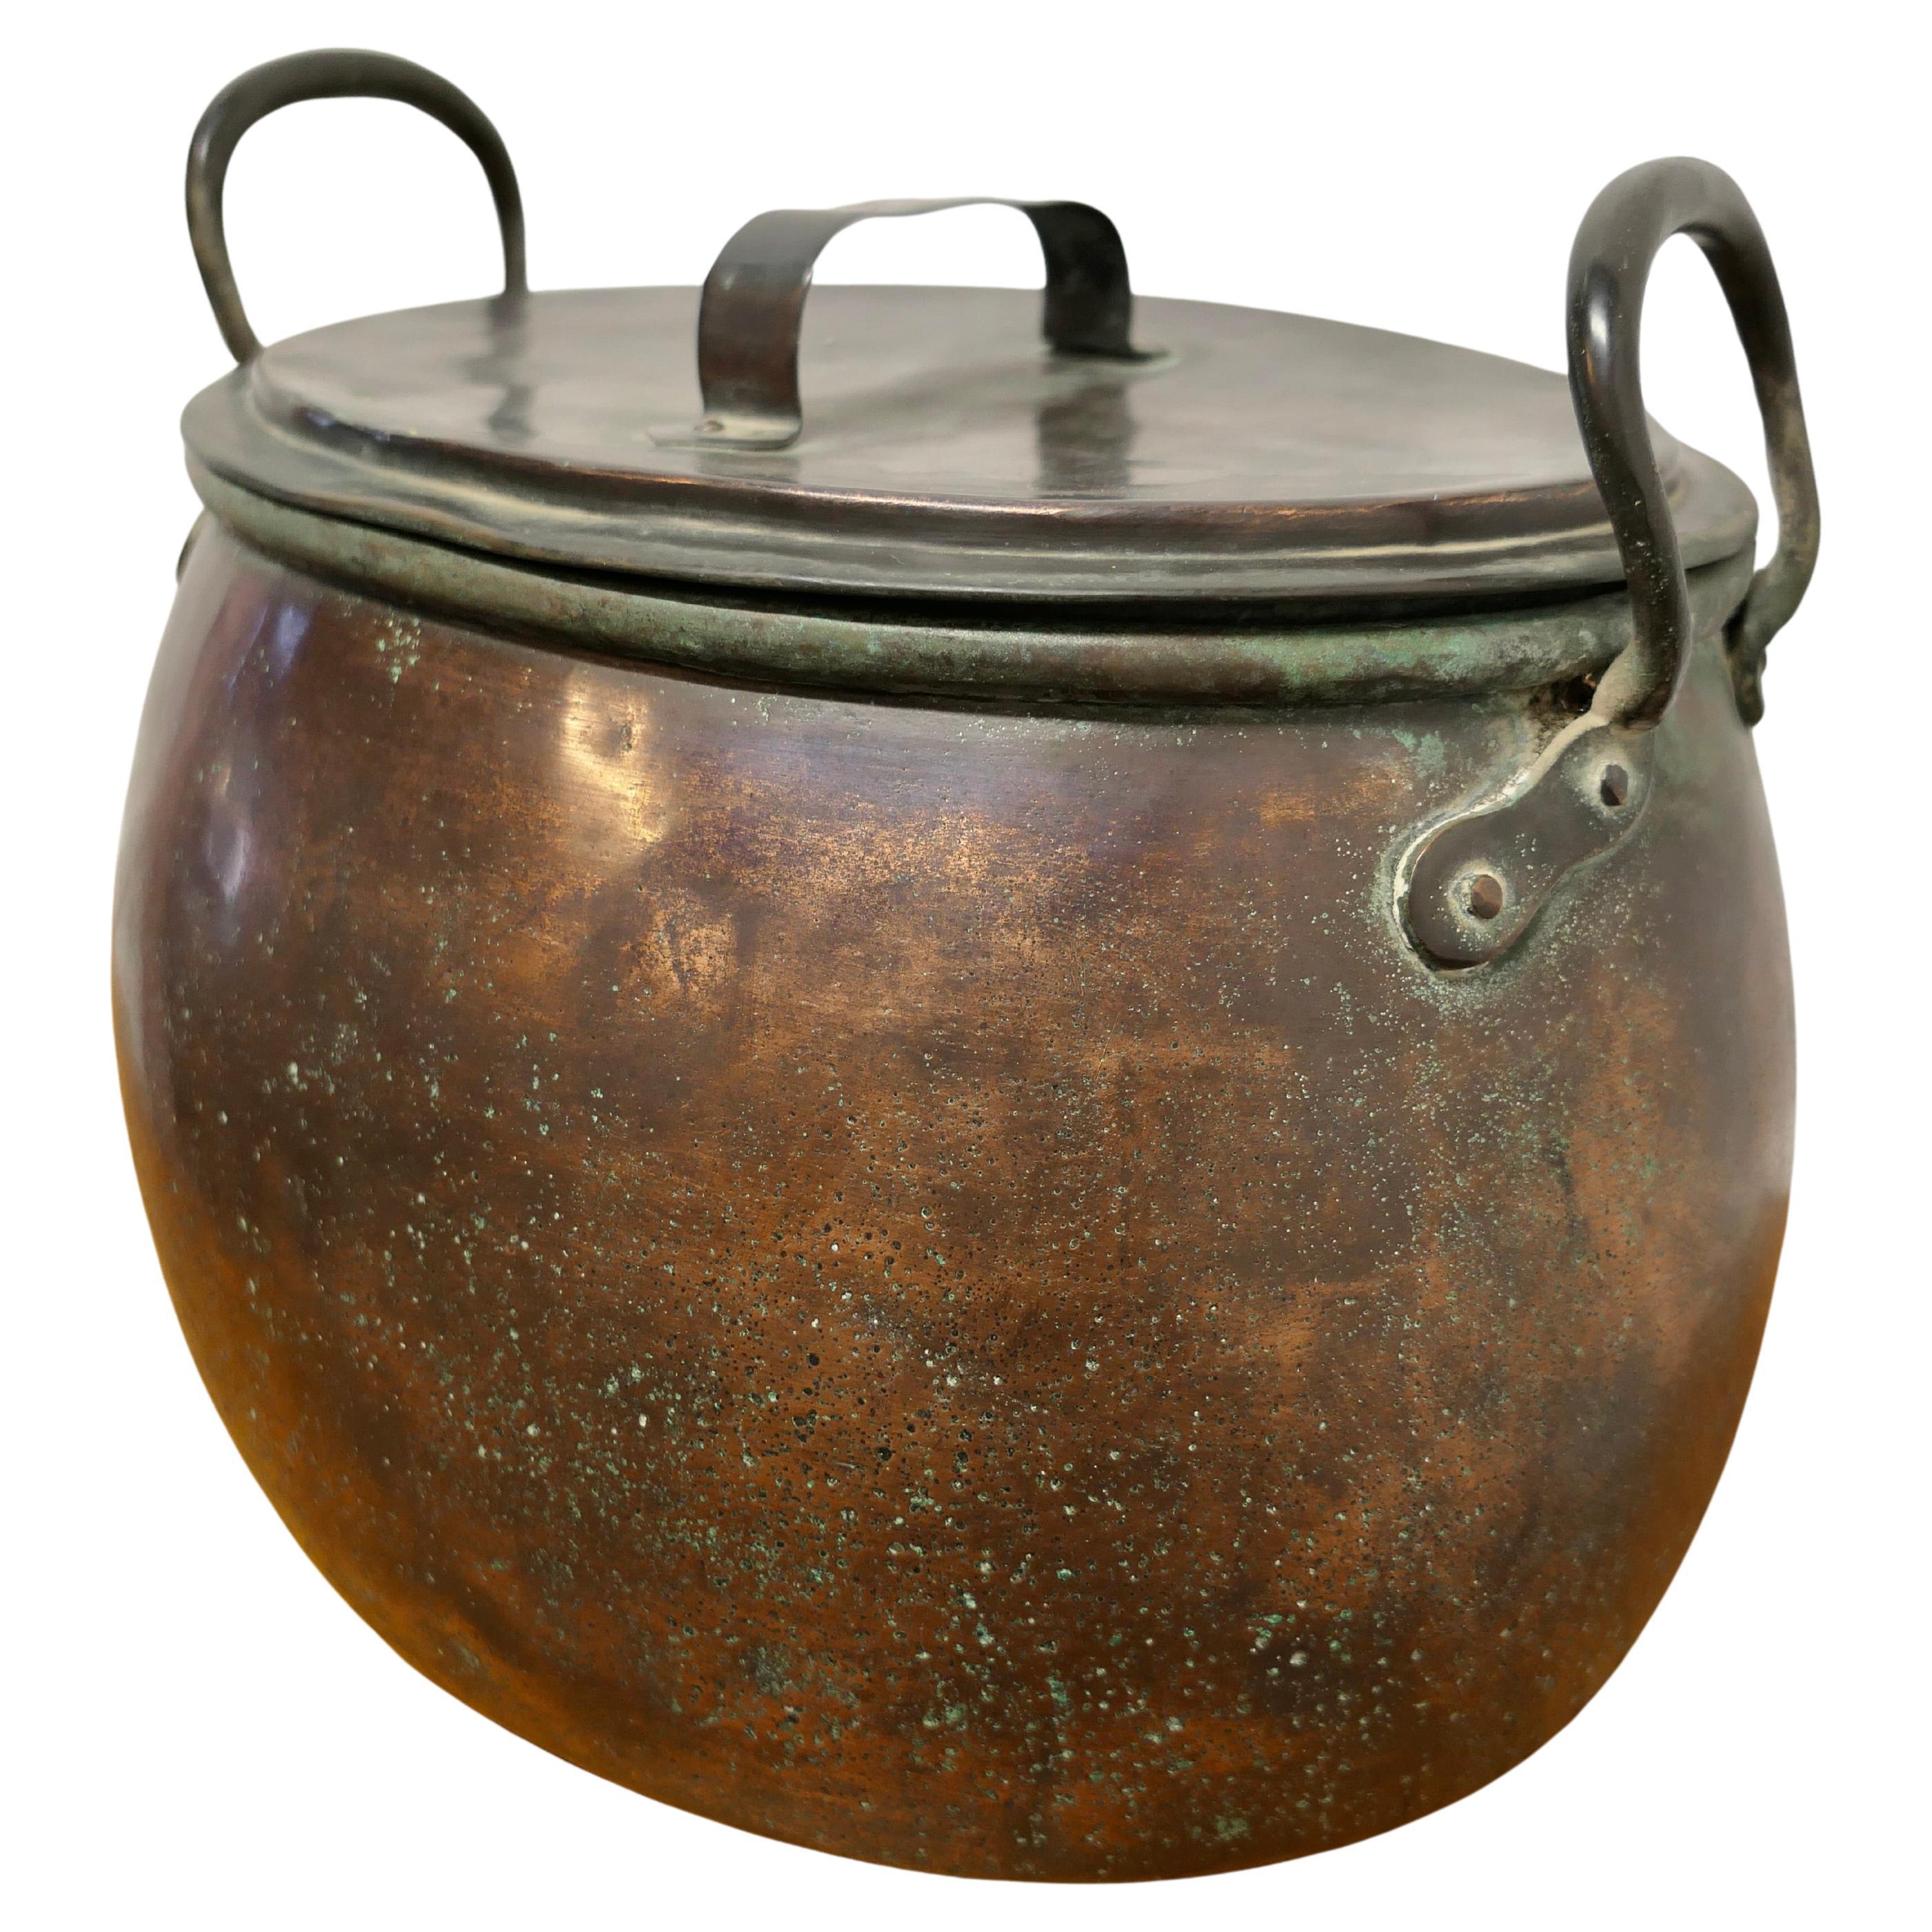 19th Century Copper Cooking Pot, Cauldron with Lid     